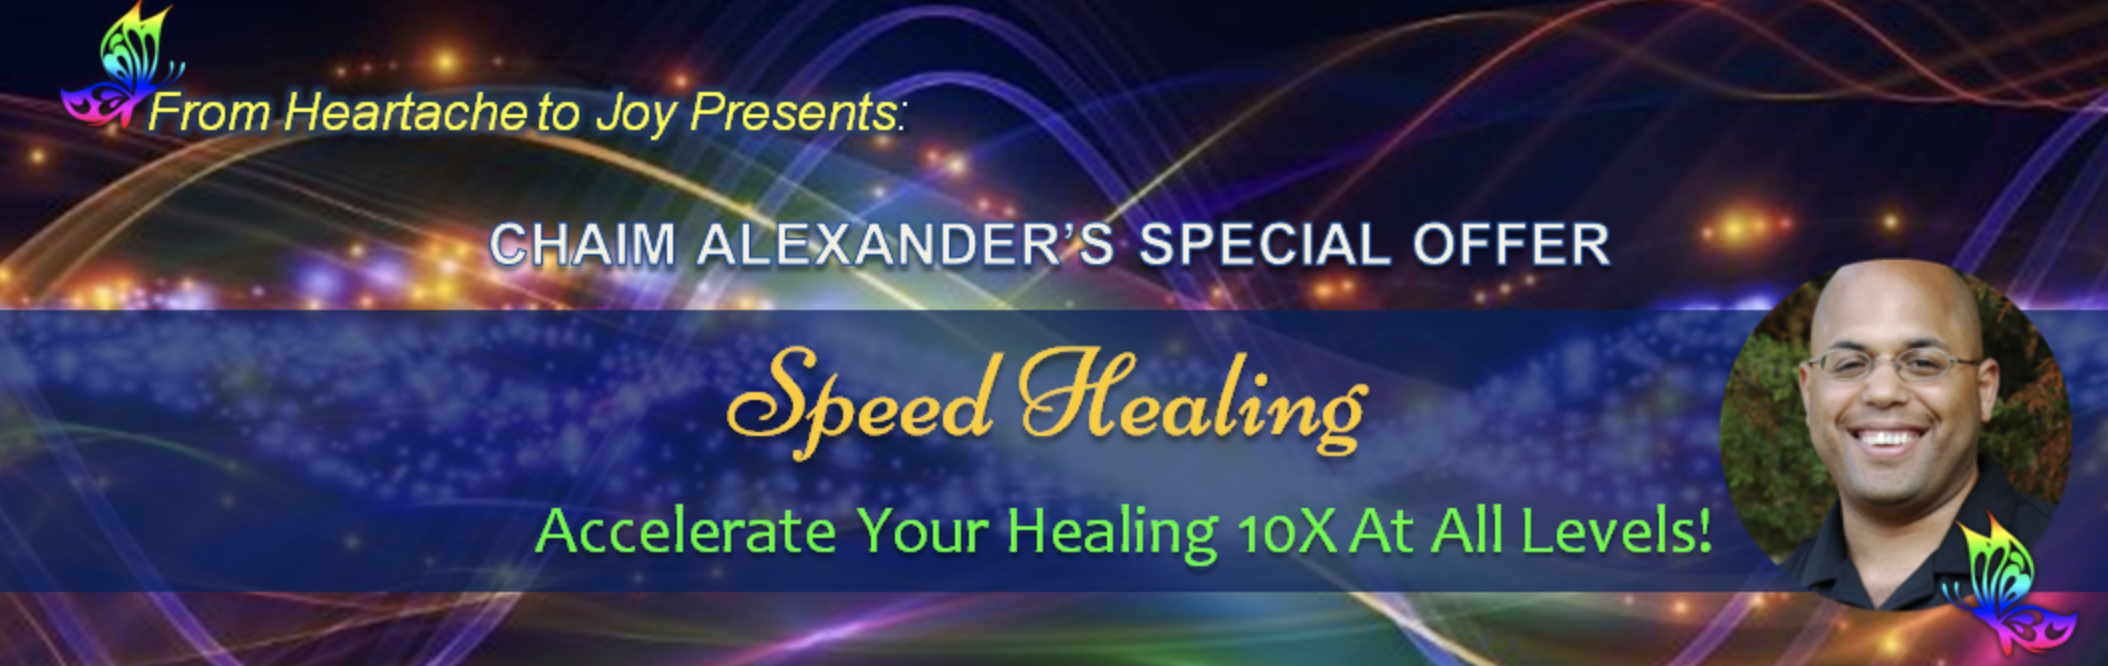 Speed Healing -Accelerate Your Healing 10X At All Levels - Chaim Alexander